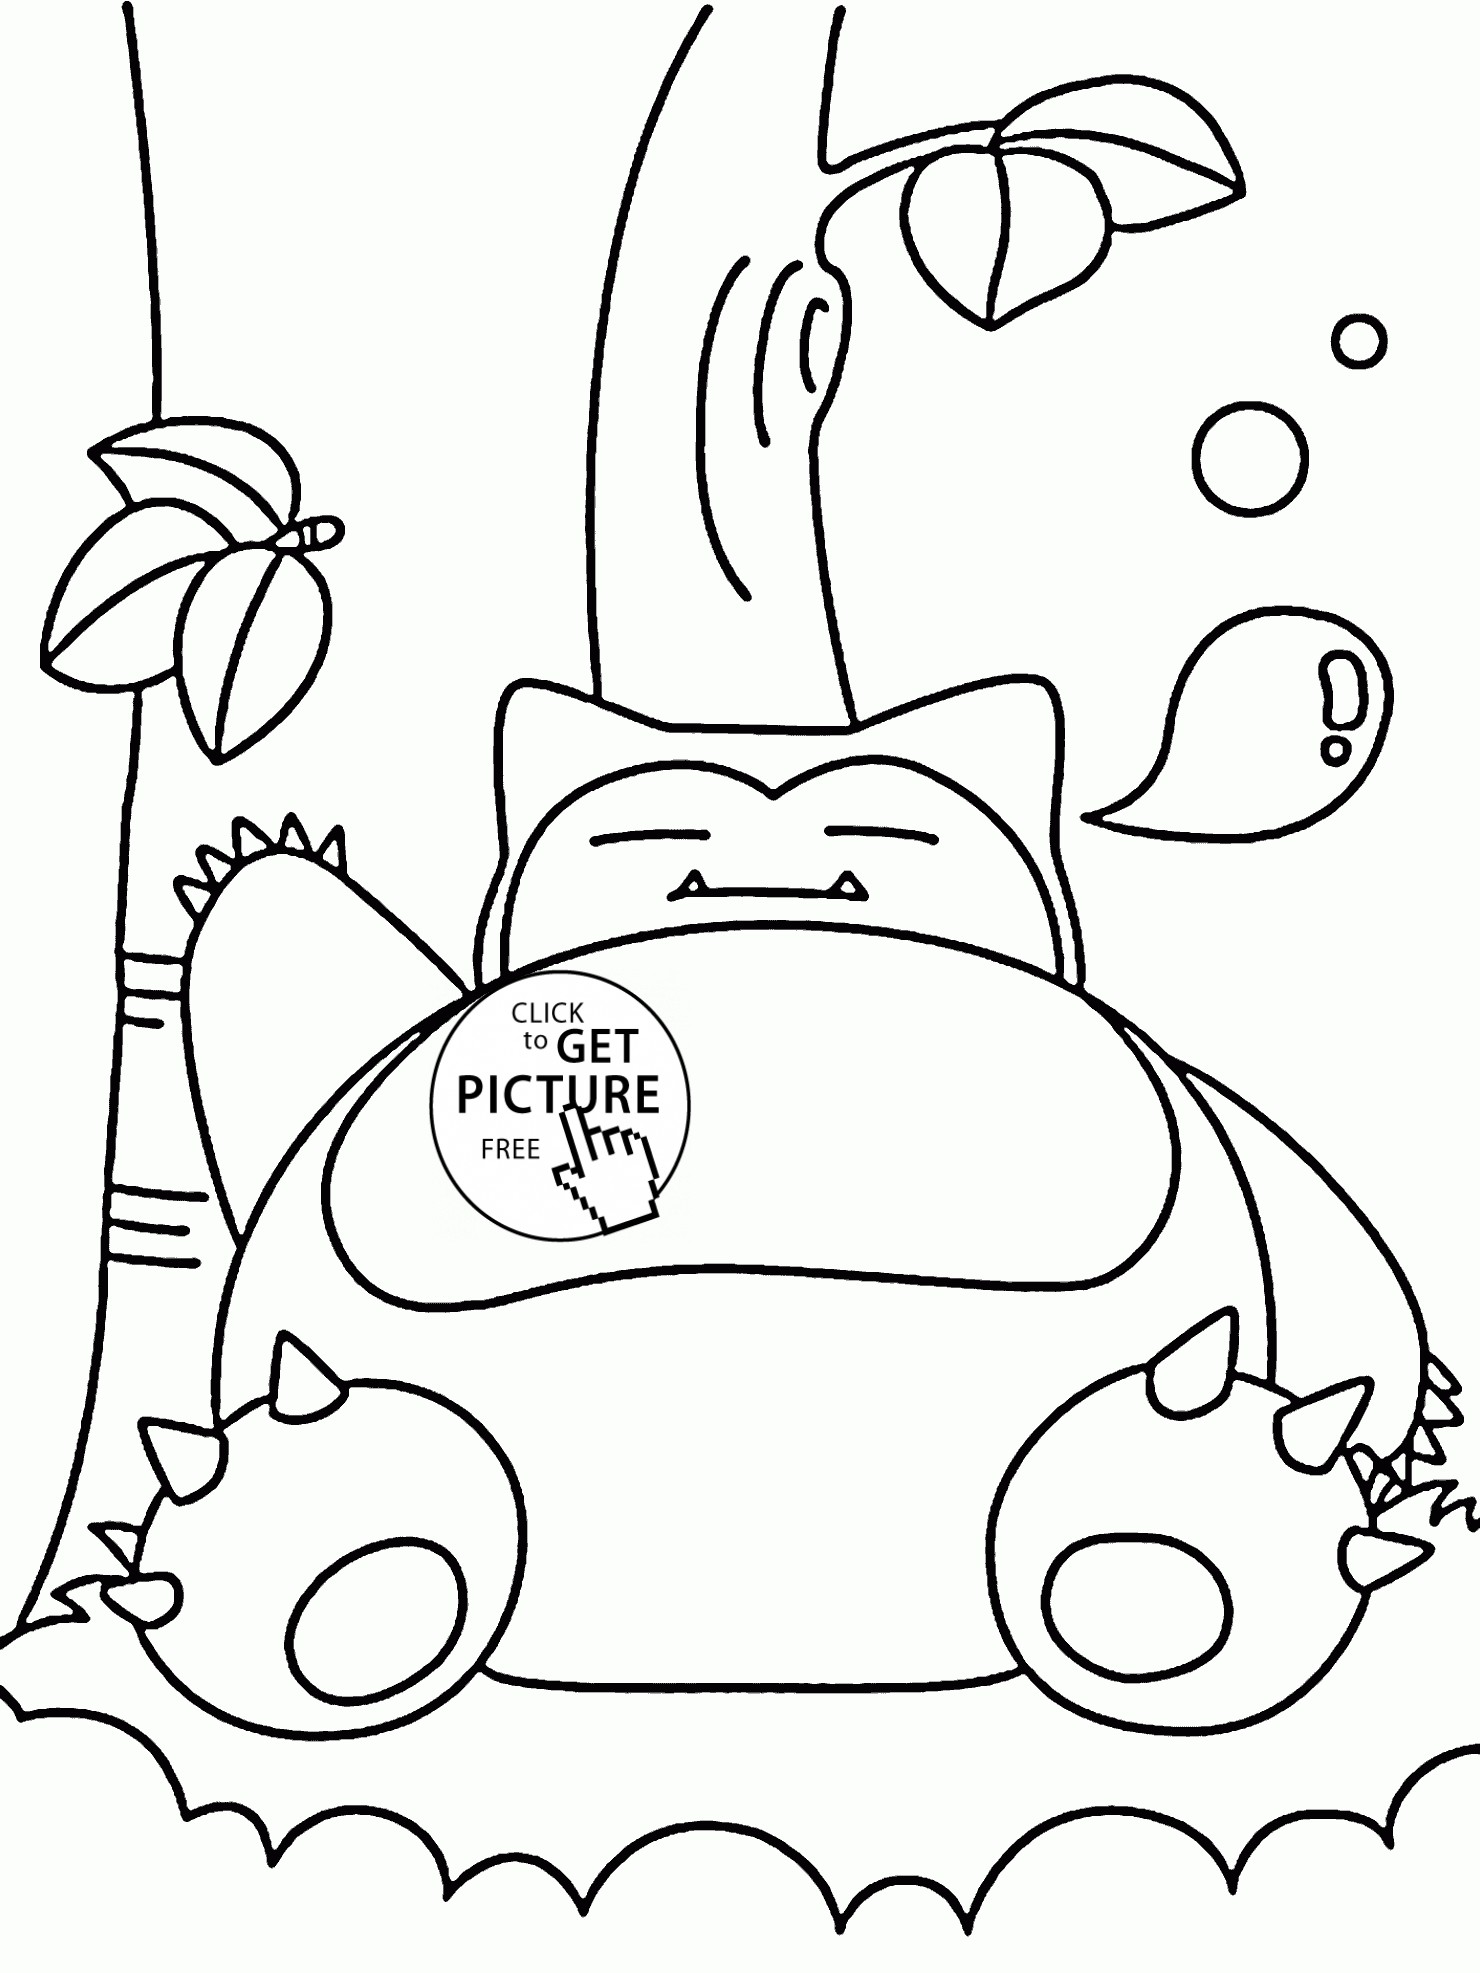 Snorlax Pokemon Coloring Pages